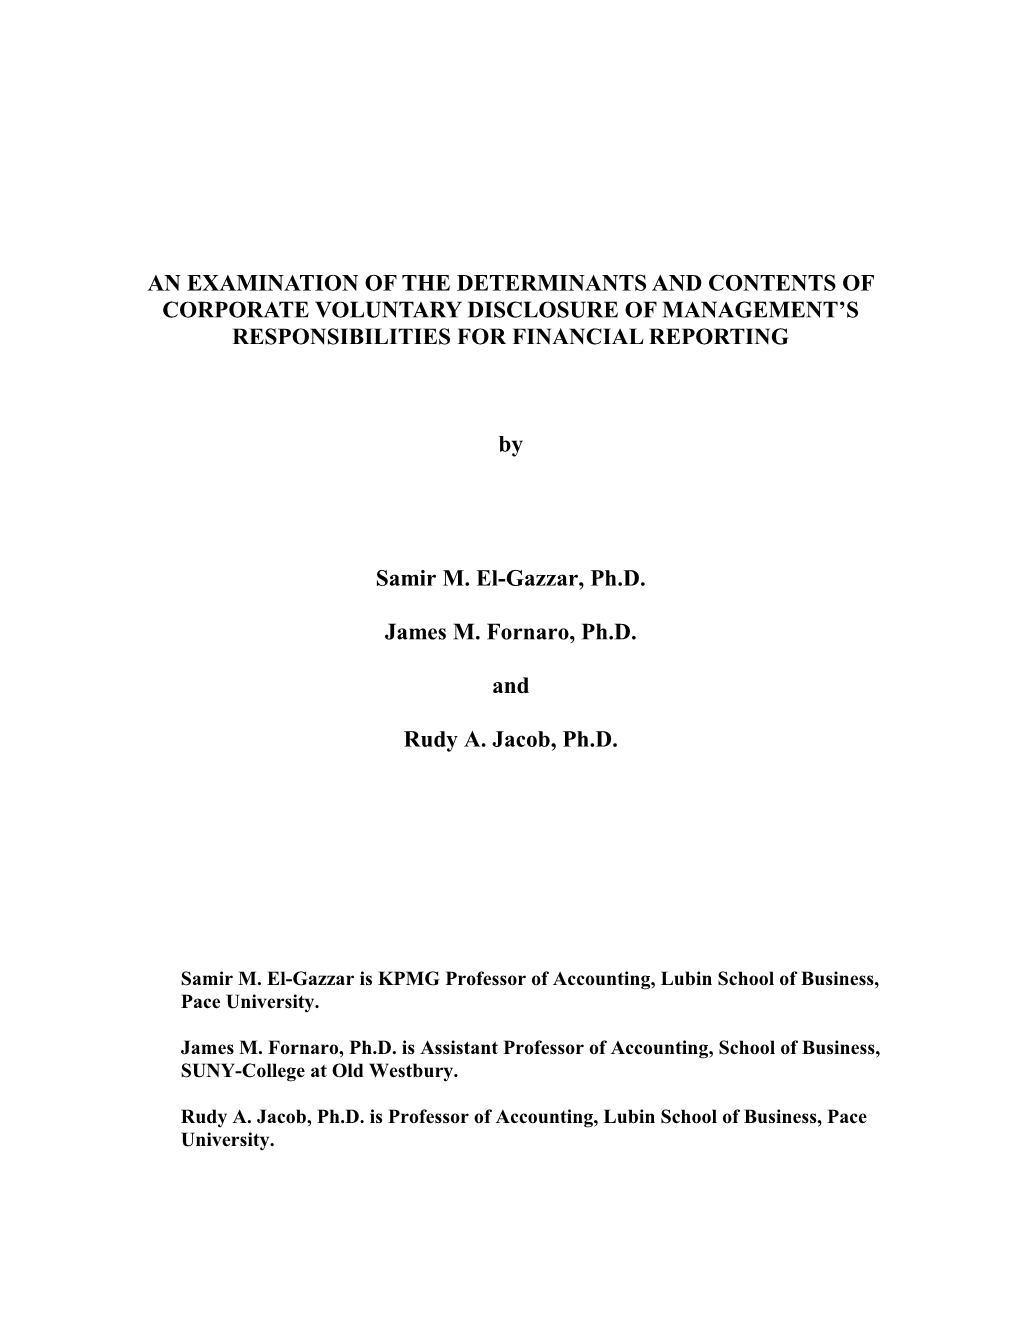 An Examination of the Determinants and Contents of Corporate Voluntary Disclosure of Management